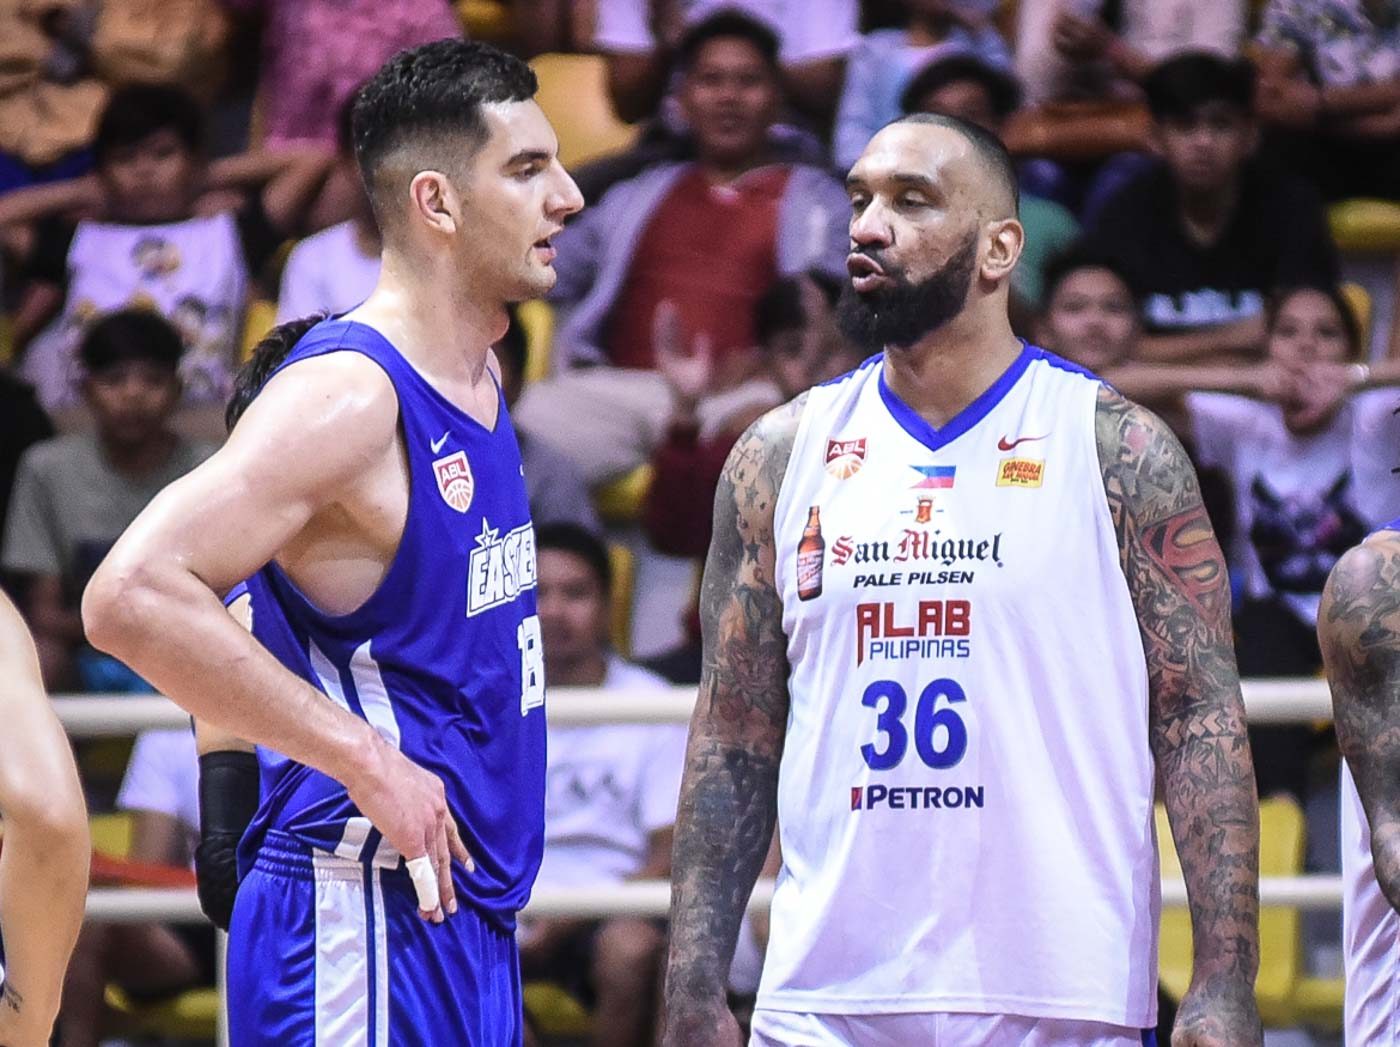 Ramos brushes off Deguara: ‘I’m a dirtier person’